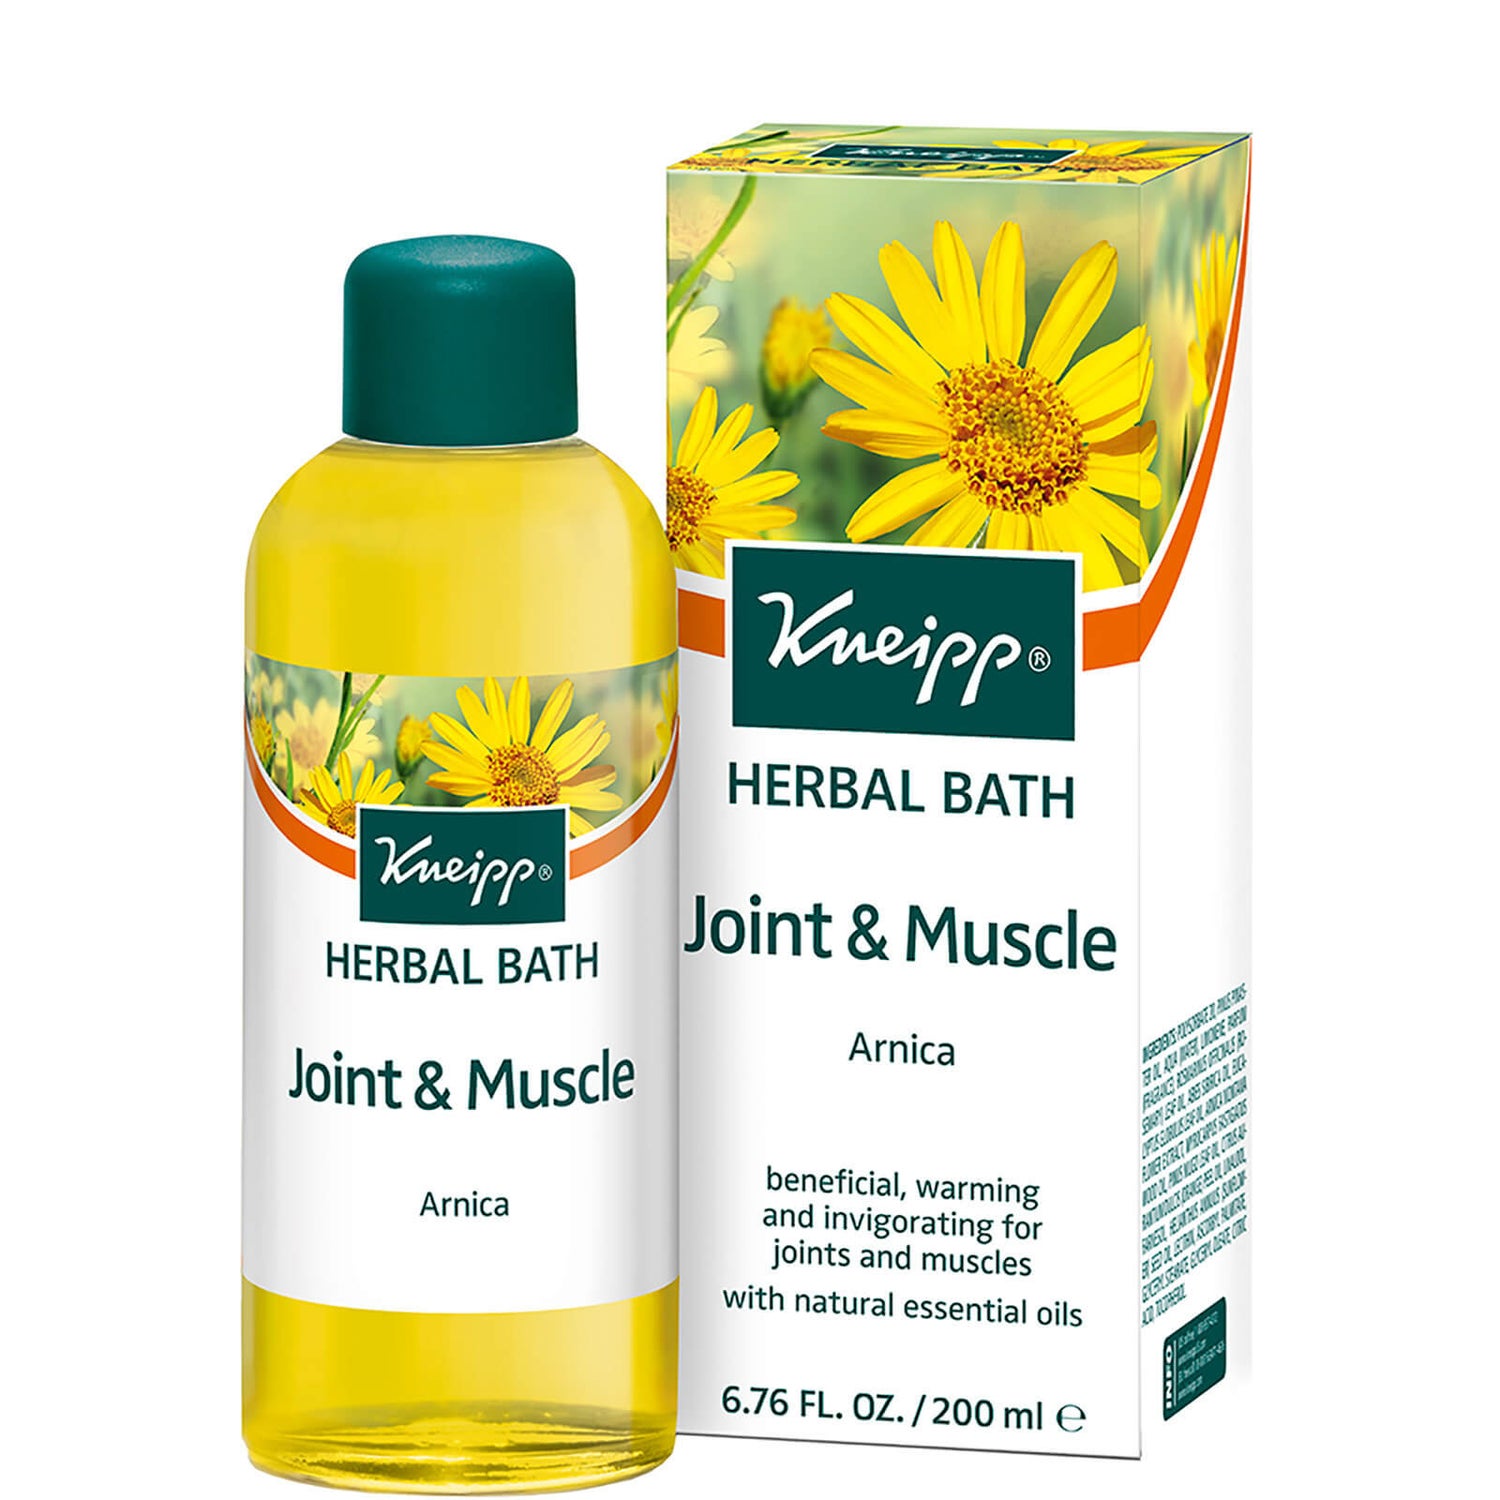 Kneipp Arnica Joint and Muscle Bath - Value Size